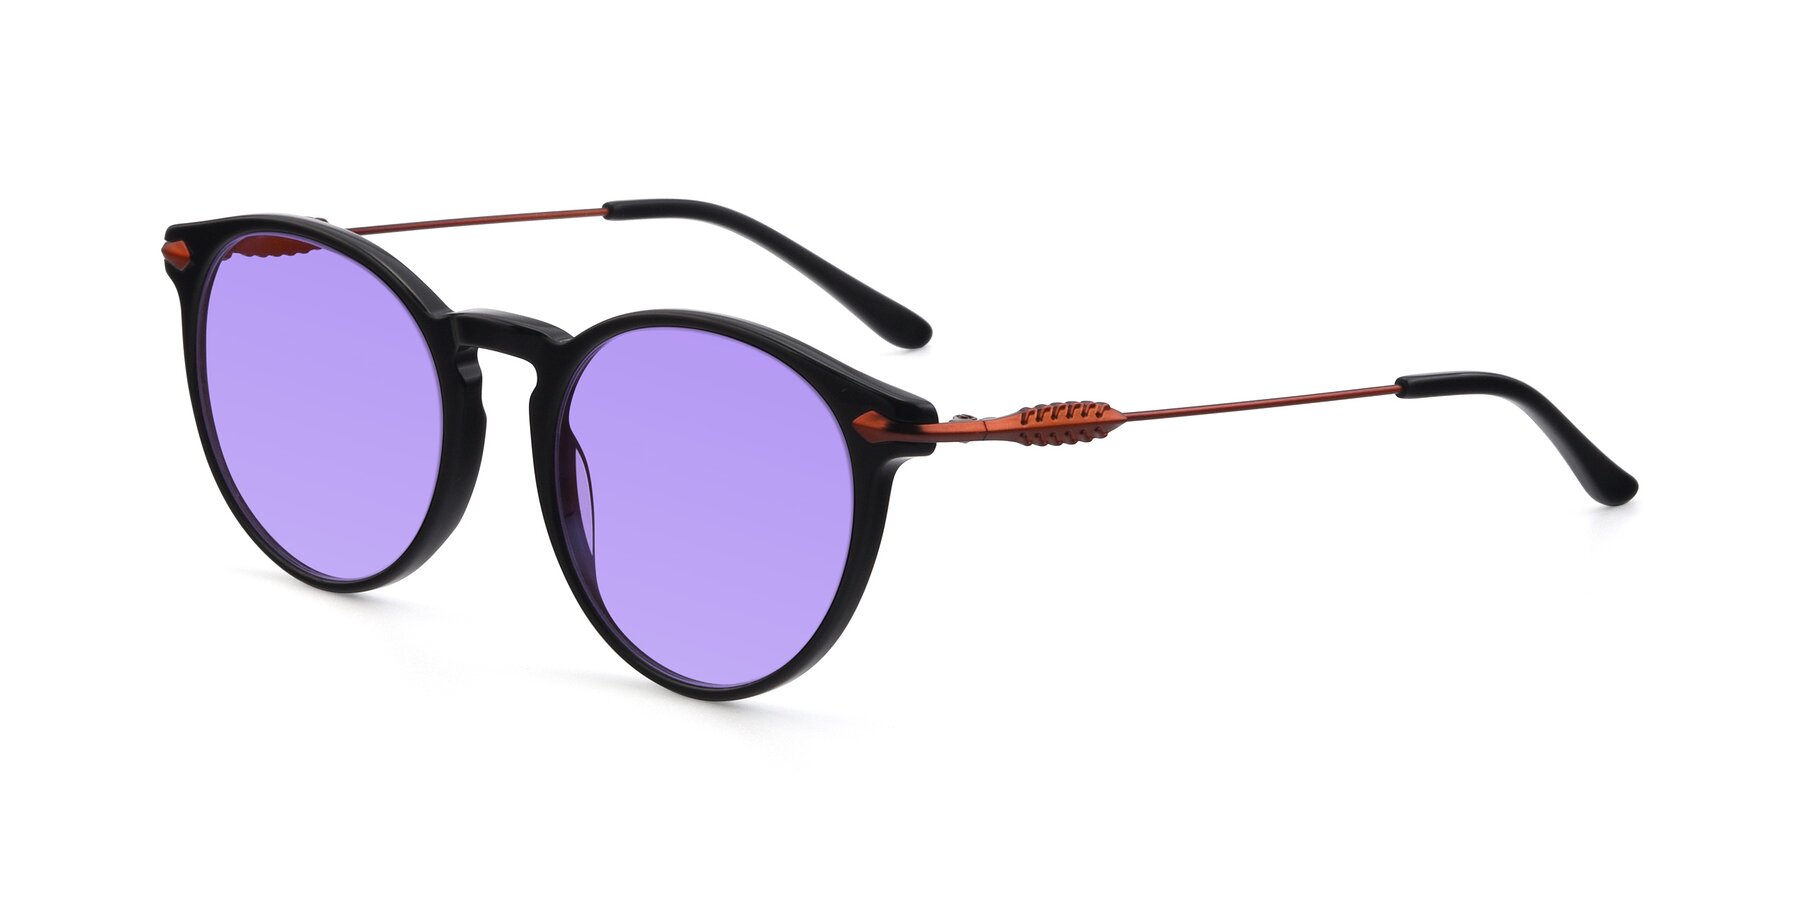 Angle of 17660 in Black with Medium Purple Tinted Lenses